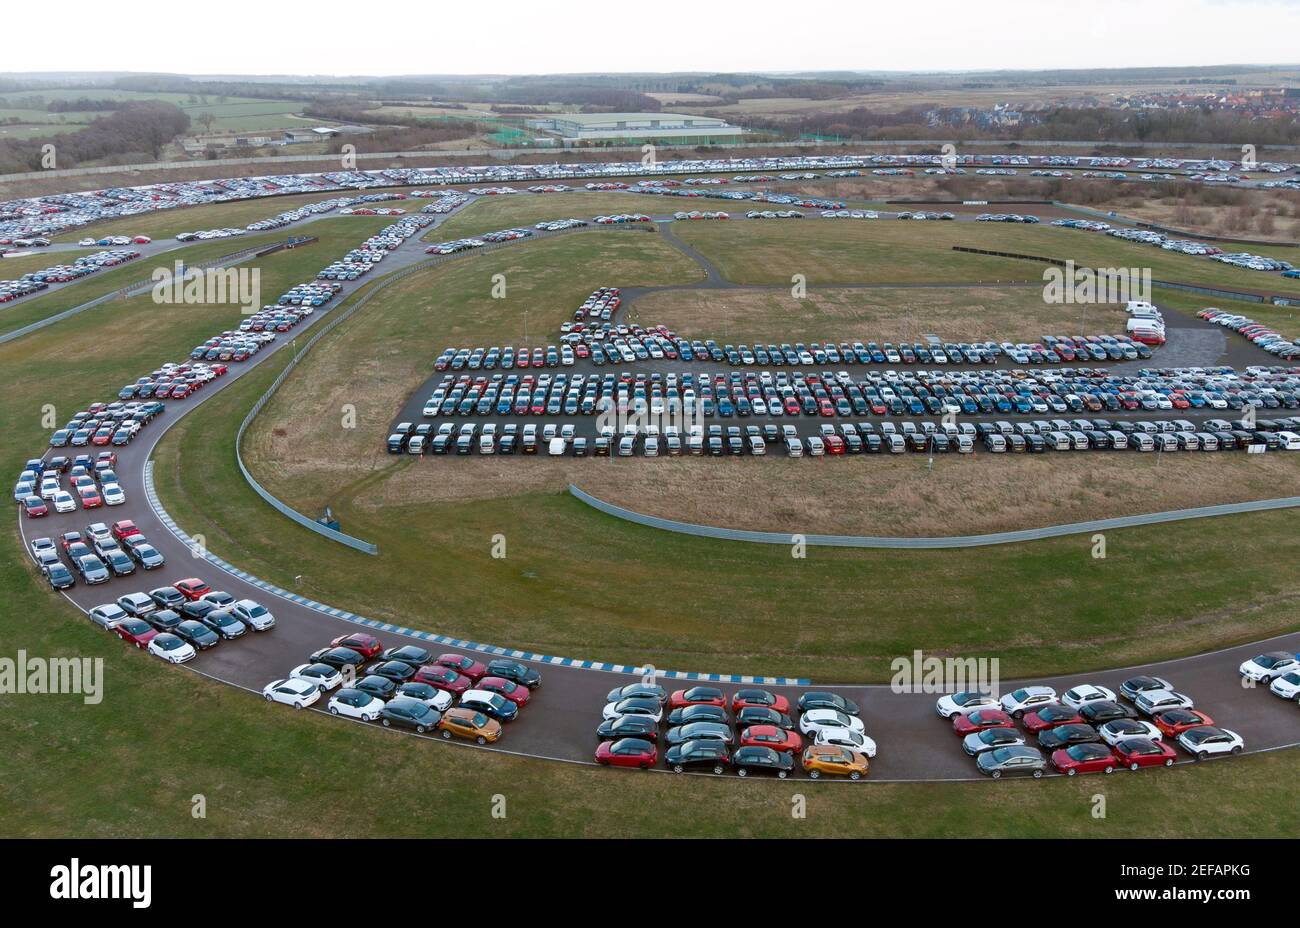 Thousands of cars parked at the Rockingham Logistics Hub in Corby,  Northamptonshire. The 250-acre site was a race track for motorsport events  until it was sold in 2018 and converted into a